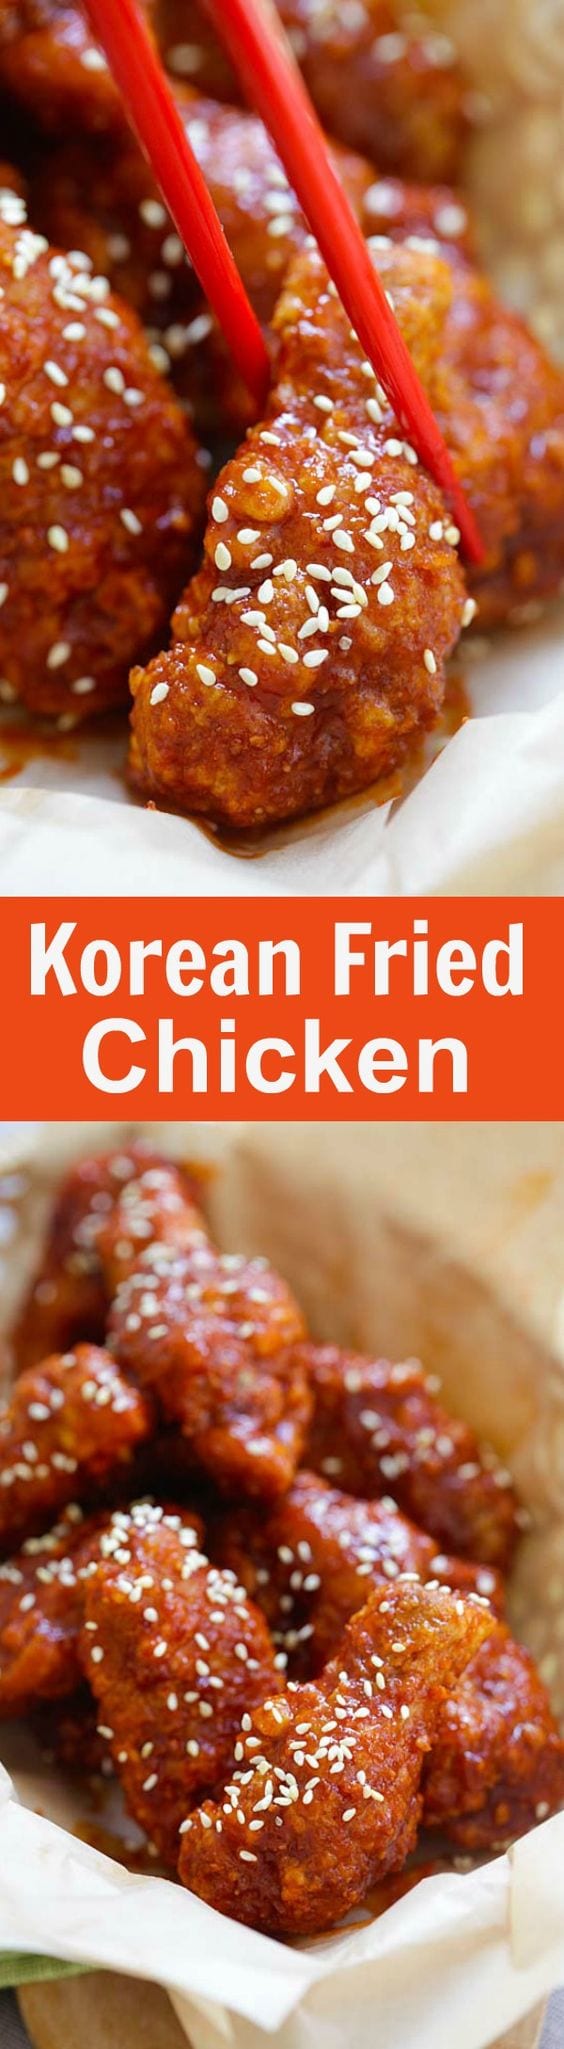 Korean Fried Chicken – the BEST Korean fried chicken recipe that yields crispy fried chicken in spicy, savory and sweet sauce. Finger lickin’ good! | rasamalaysia.com